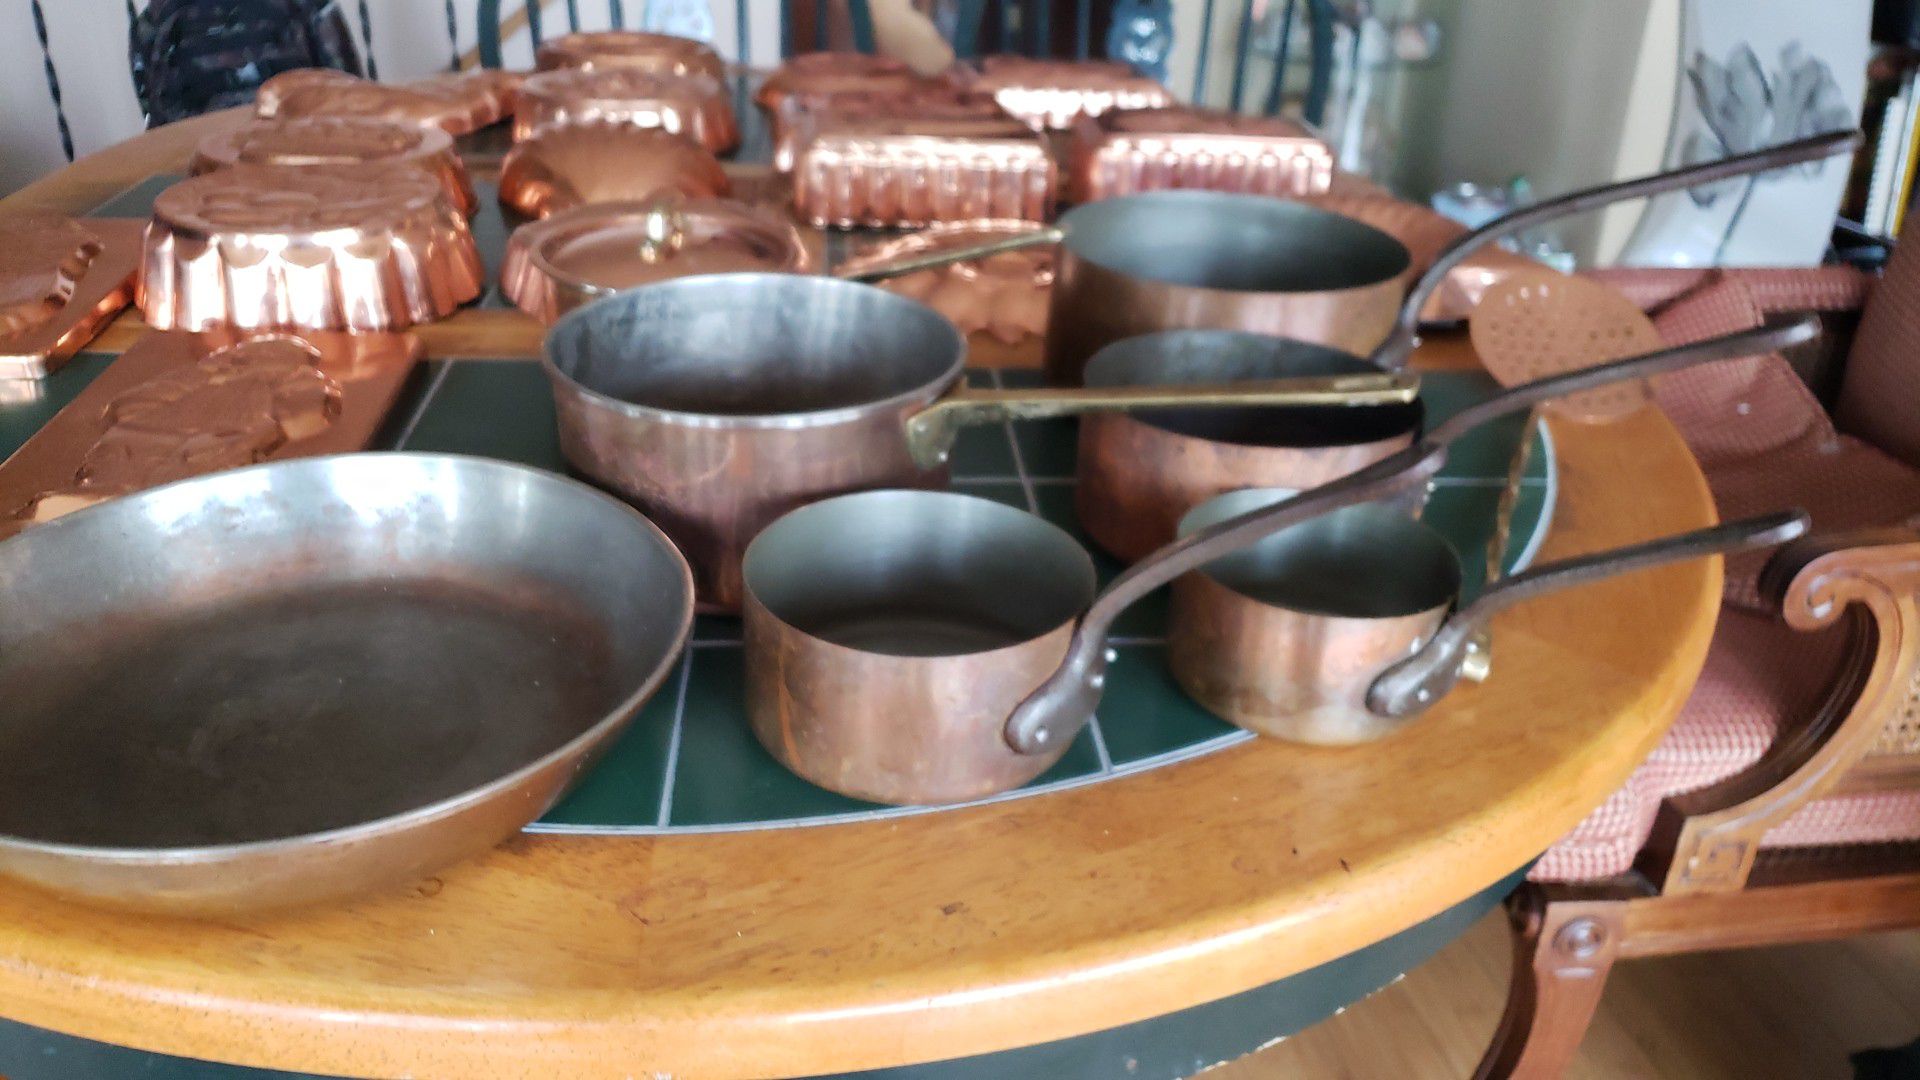 Huge copper cookware and Bakeware set 26 piece